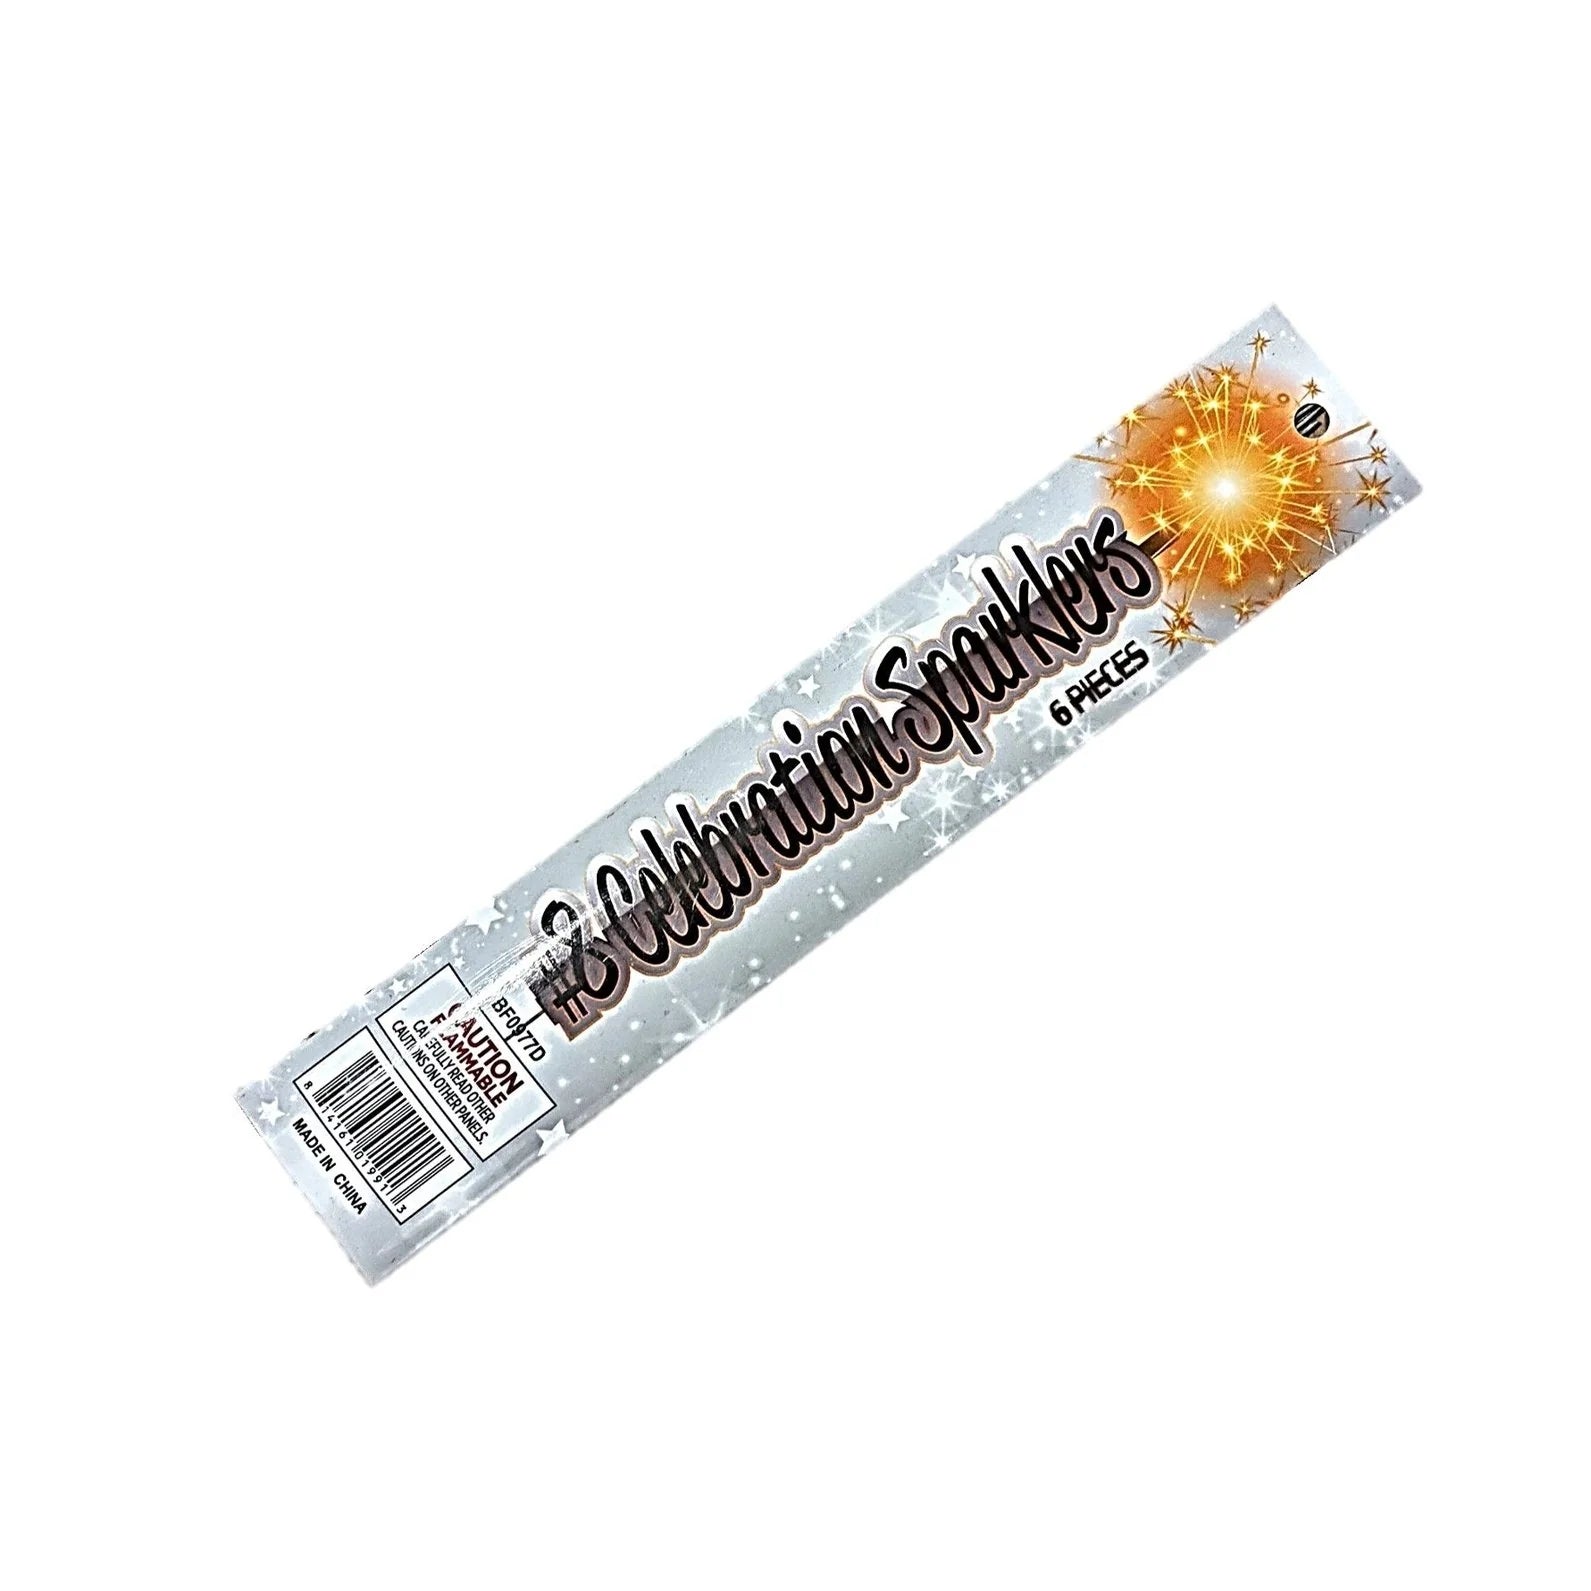 72 Piece 8 Inch Gold Sparklers - 12 Packs of 6 Sparklers